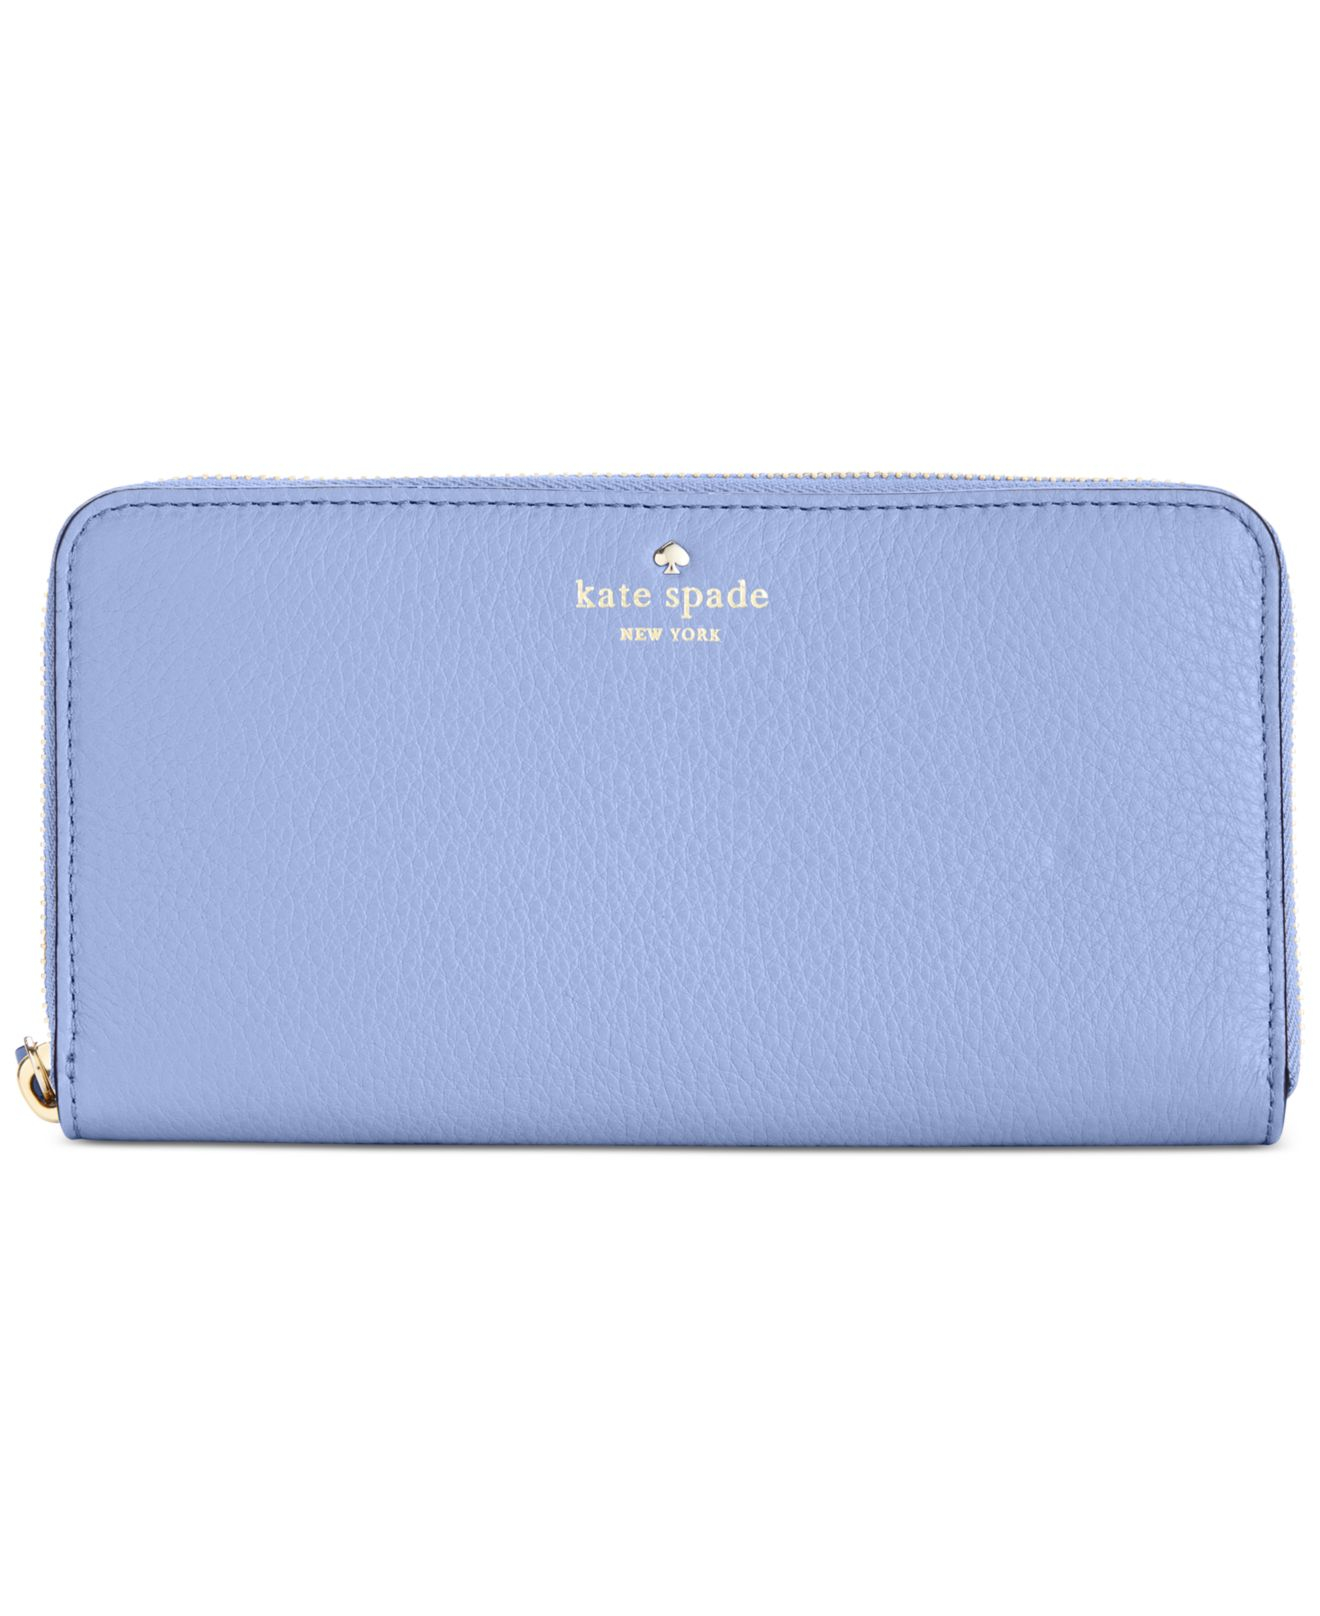 Lyst - Kate Spade New York Cobble Hill Lacey Wallet in Blue